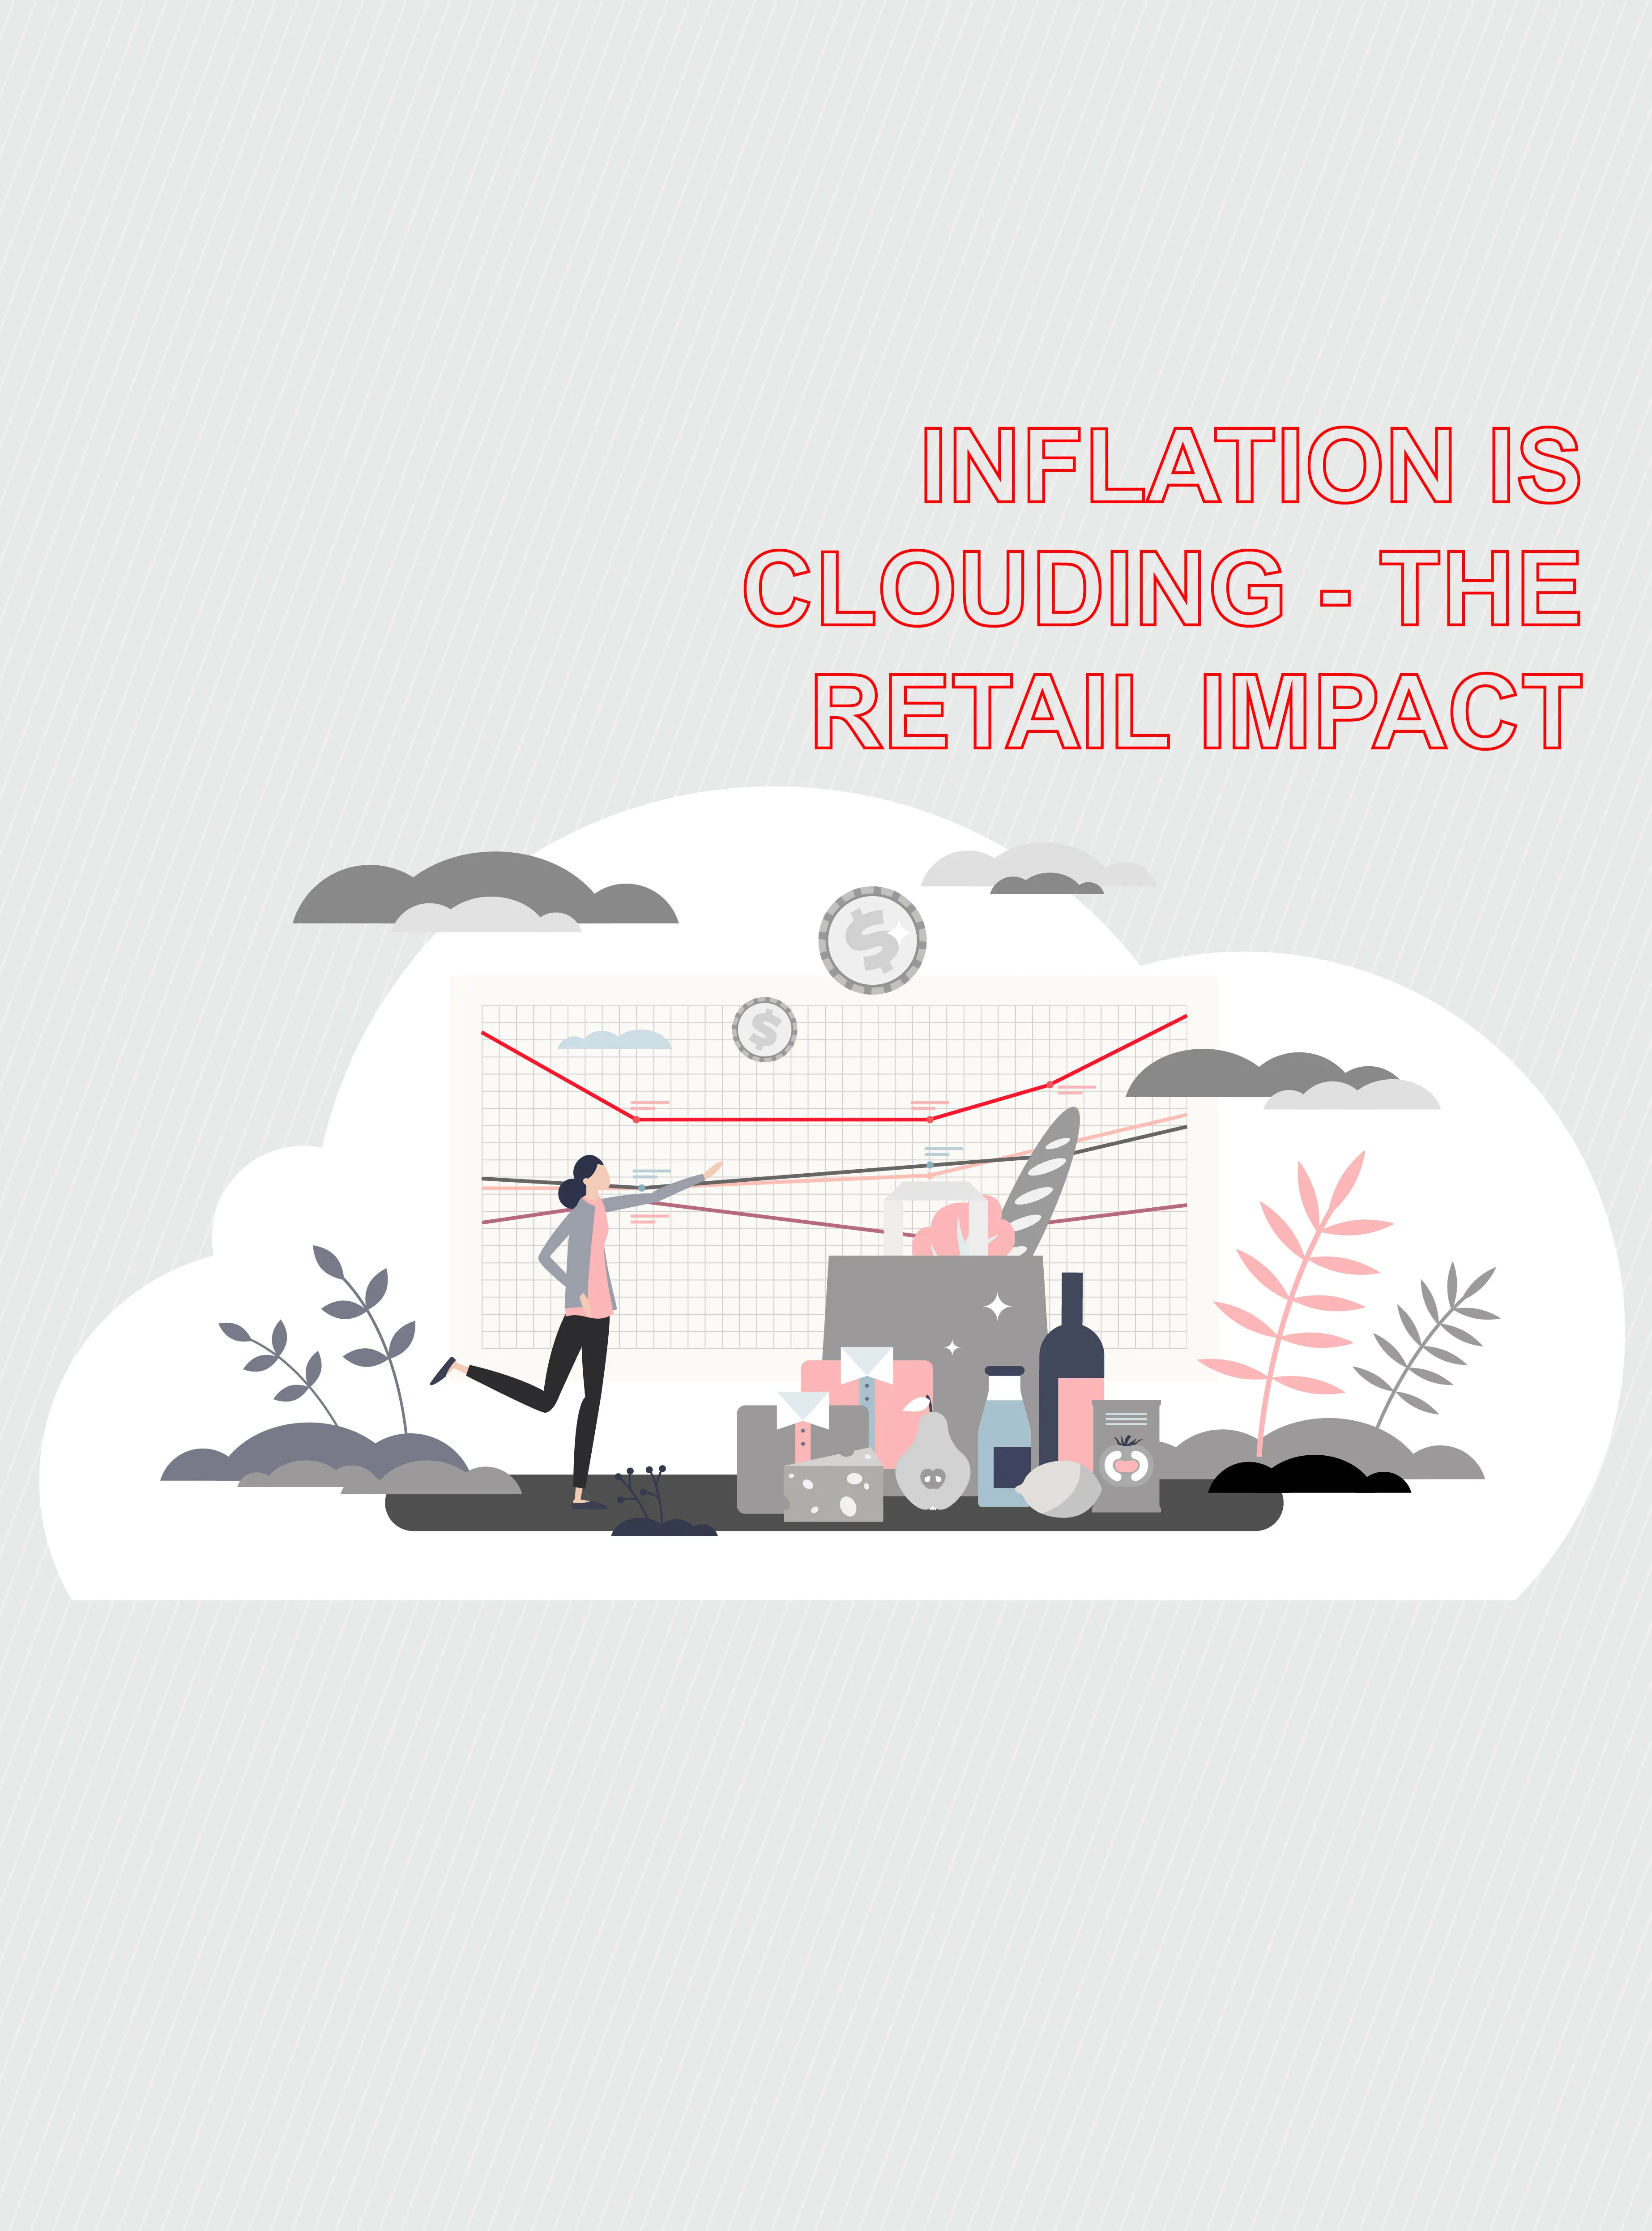 Inflation is clouding -the retail impact